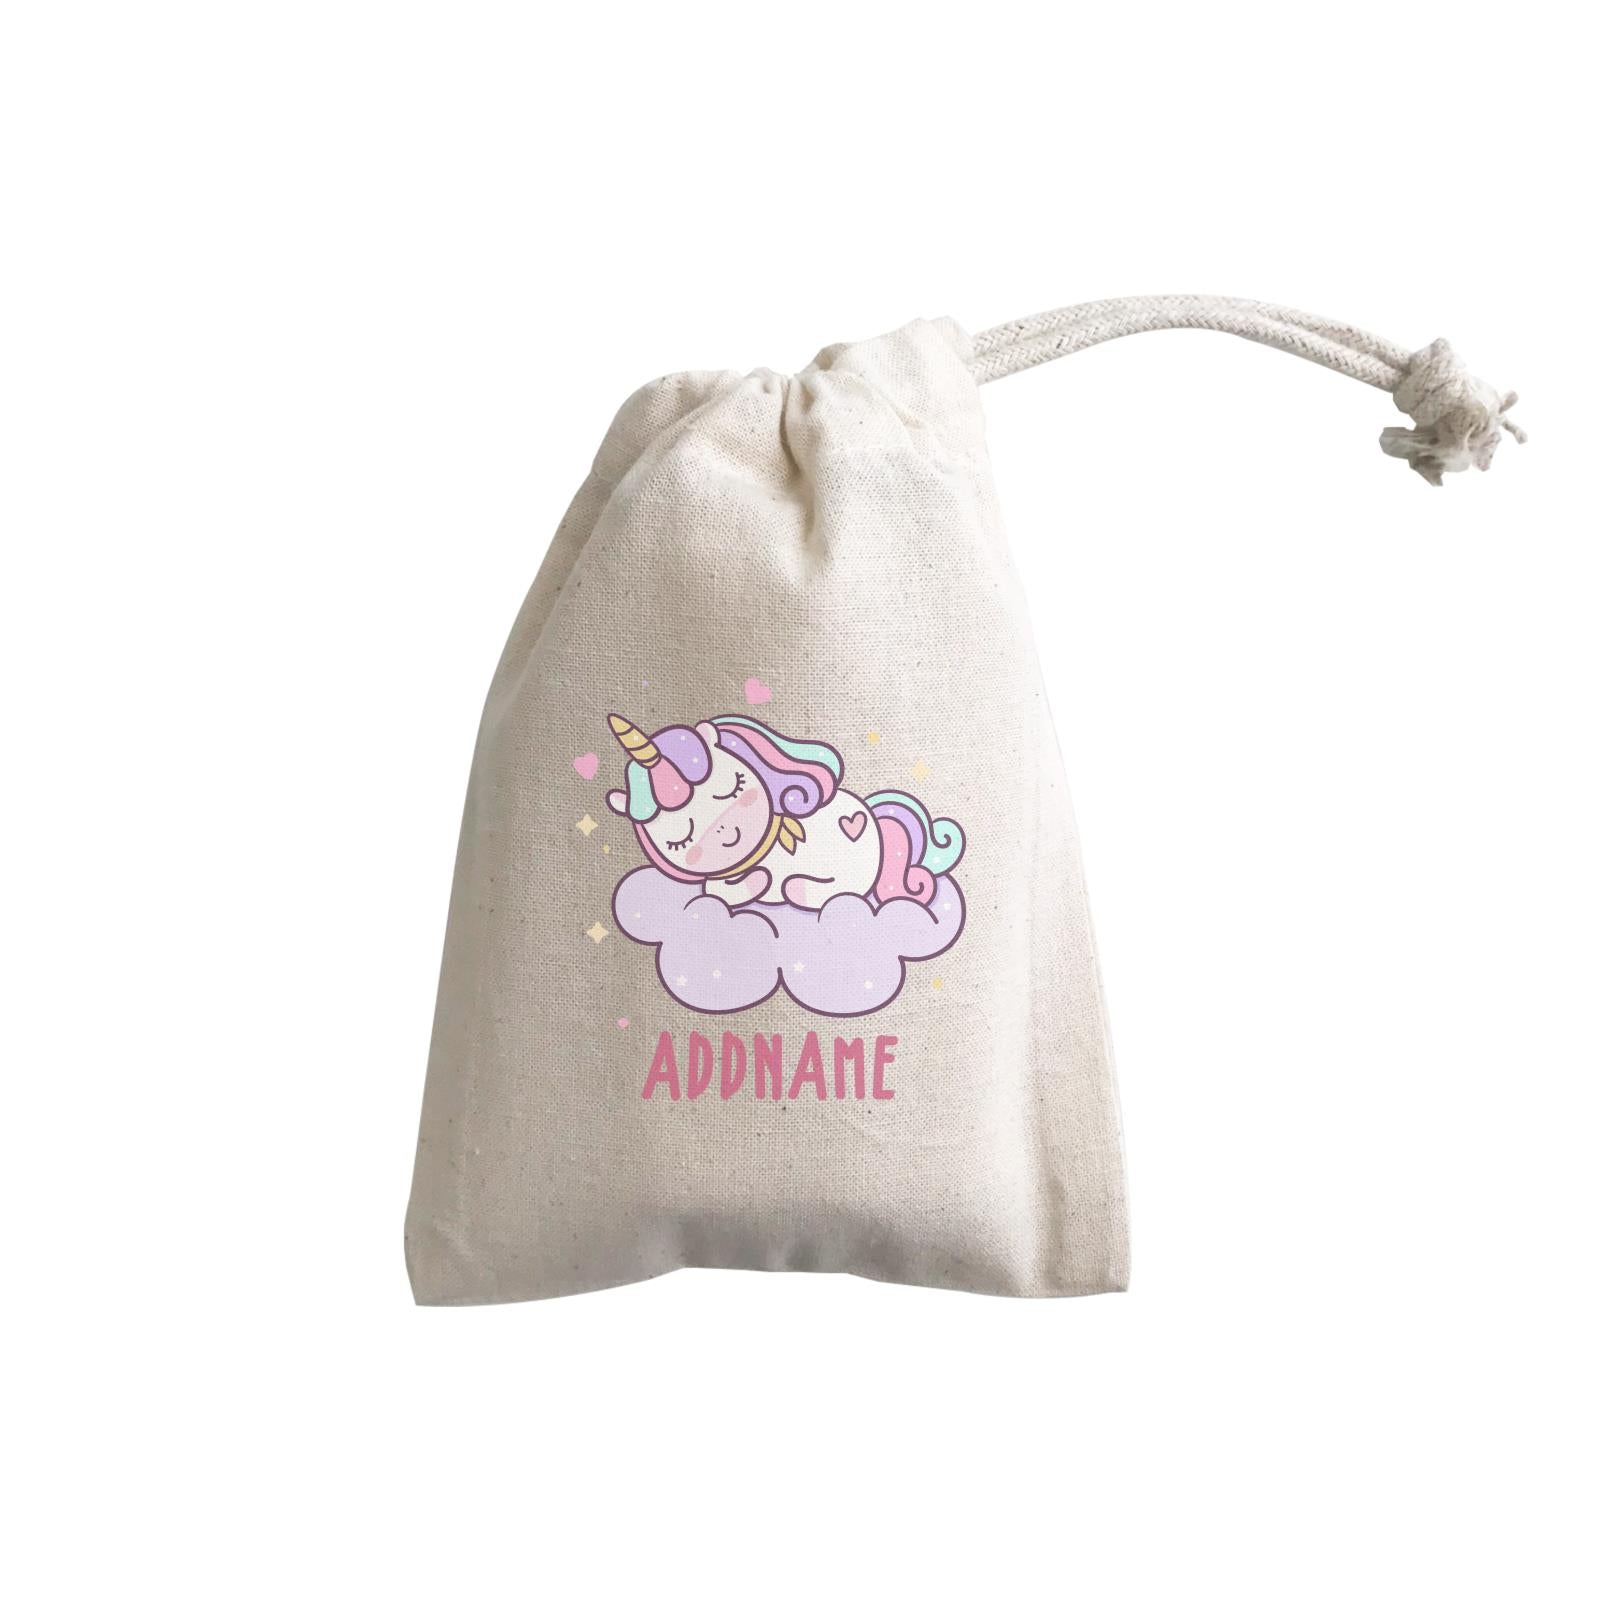 Unicorn And Princess Series Cute Pastel Sleeping Unicorn On a Cloud Addname GP Gift Pouch